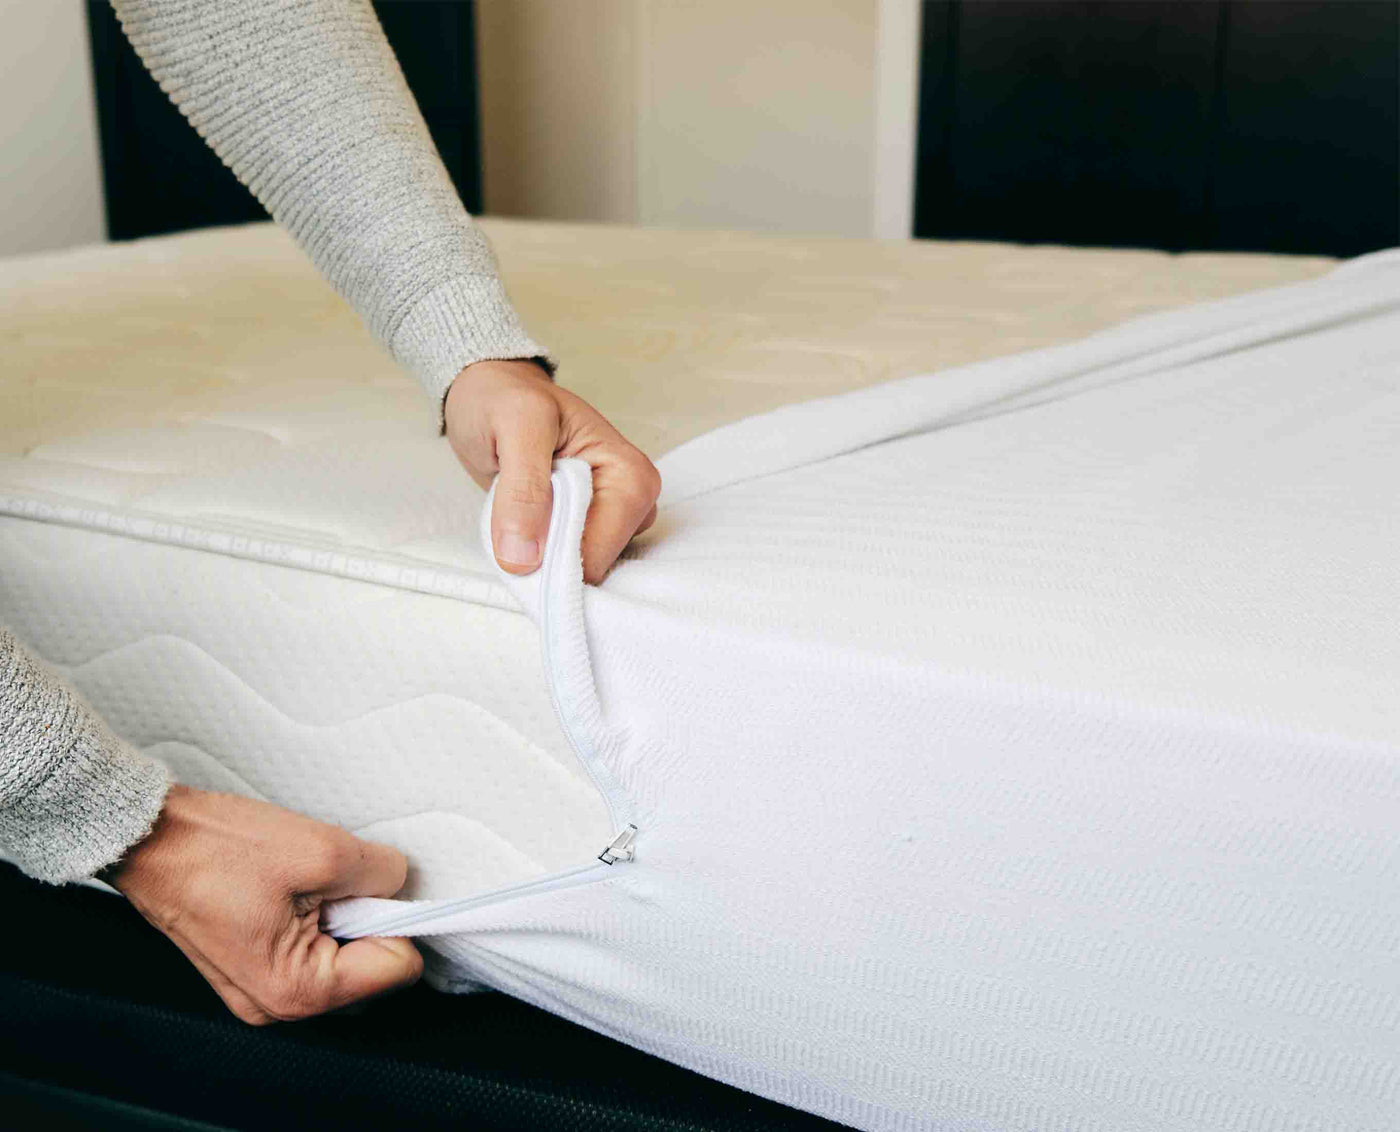 Which mattress protector is best for bed bugs?